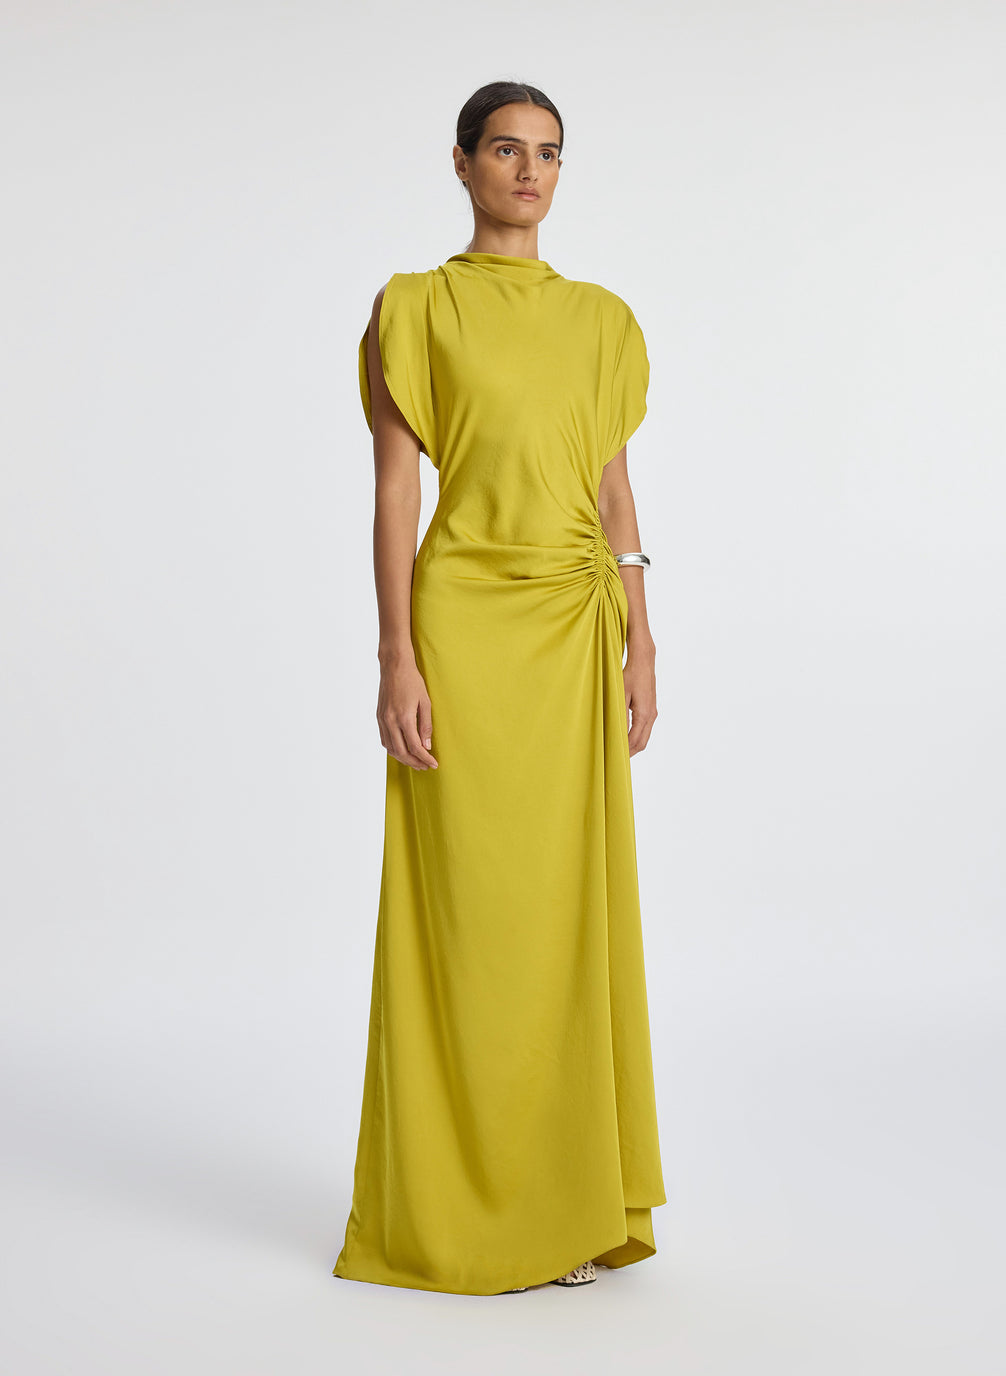 side view of woman wearing yellow satin short sleeve gown